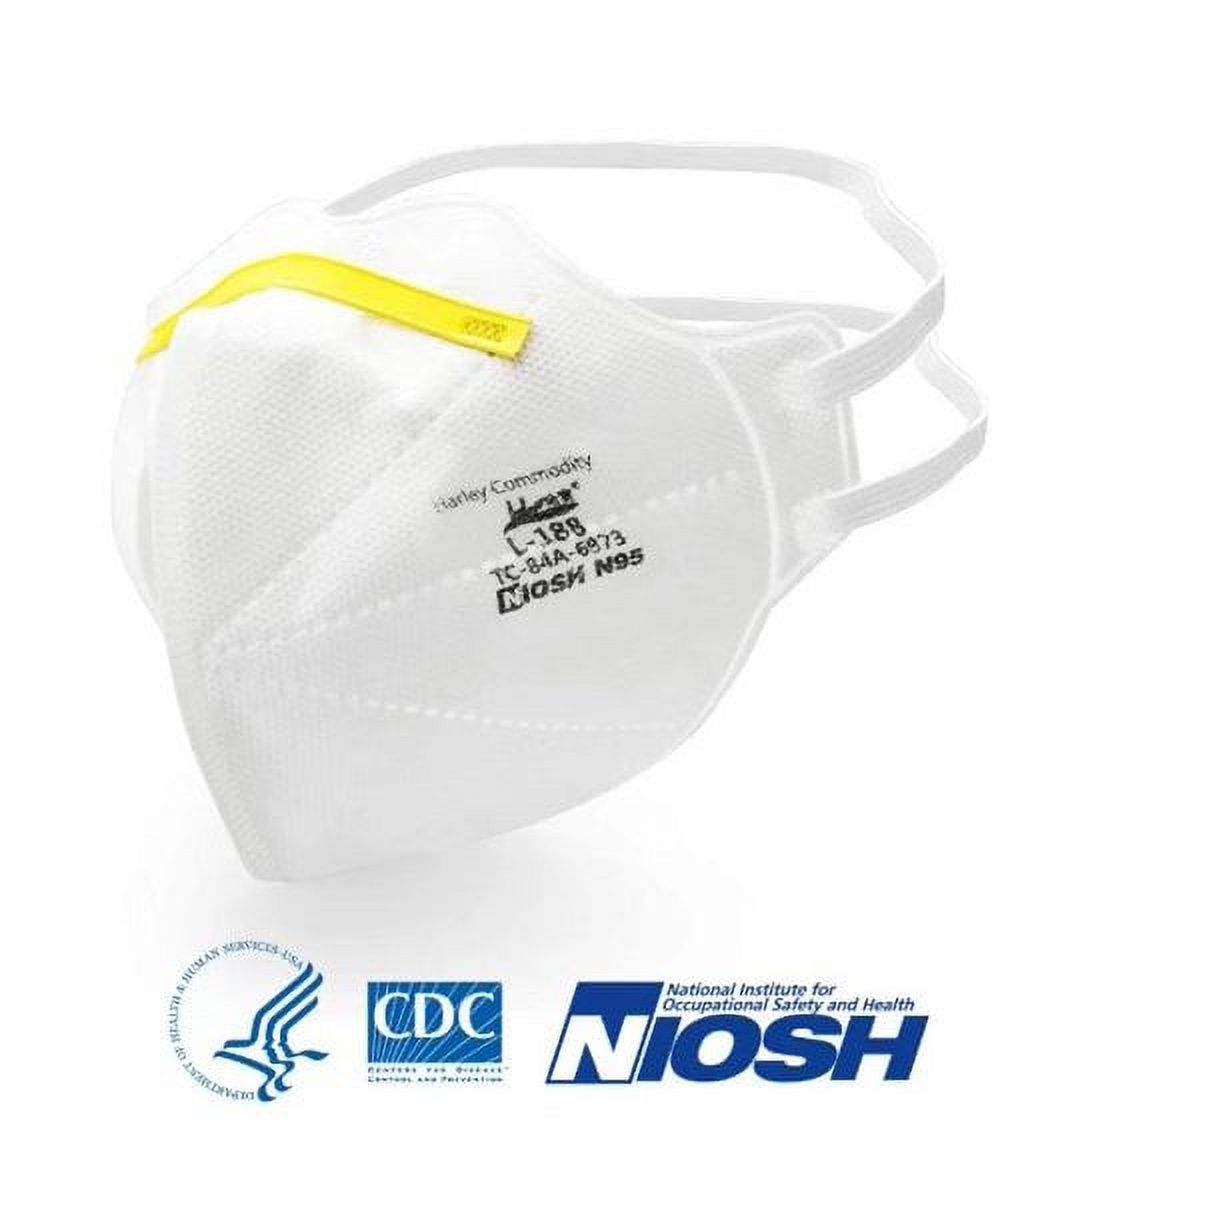 Harley Commodity l-188 N95 Respirator Face Mask-Model L-188-NIOSH Approved-20 per Box. Latex-free. More than 95% Filtration with Two Horizontal Straps Behind the Head - image 1 of 2